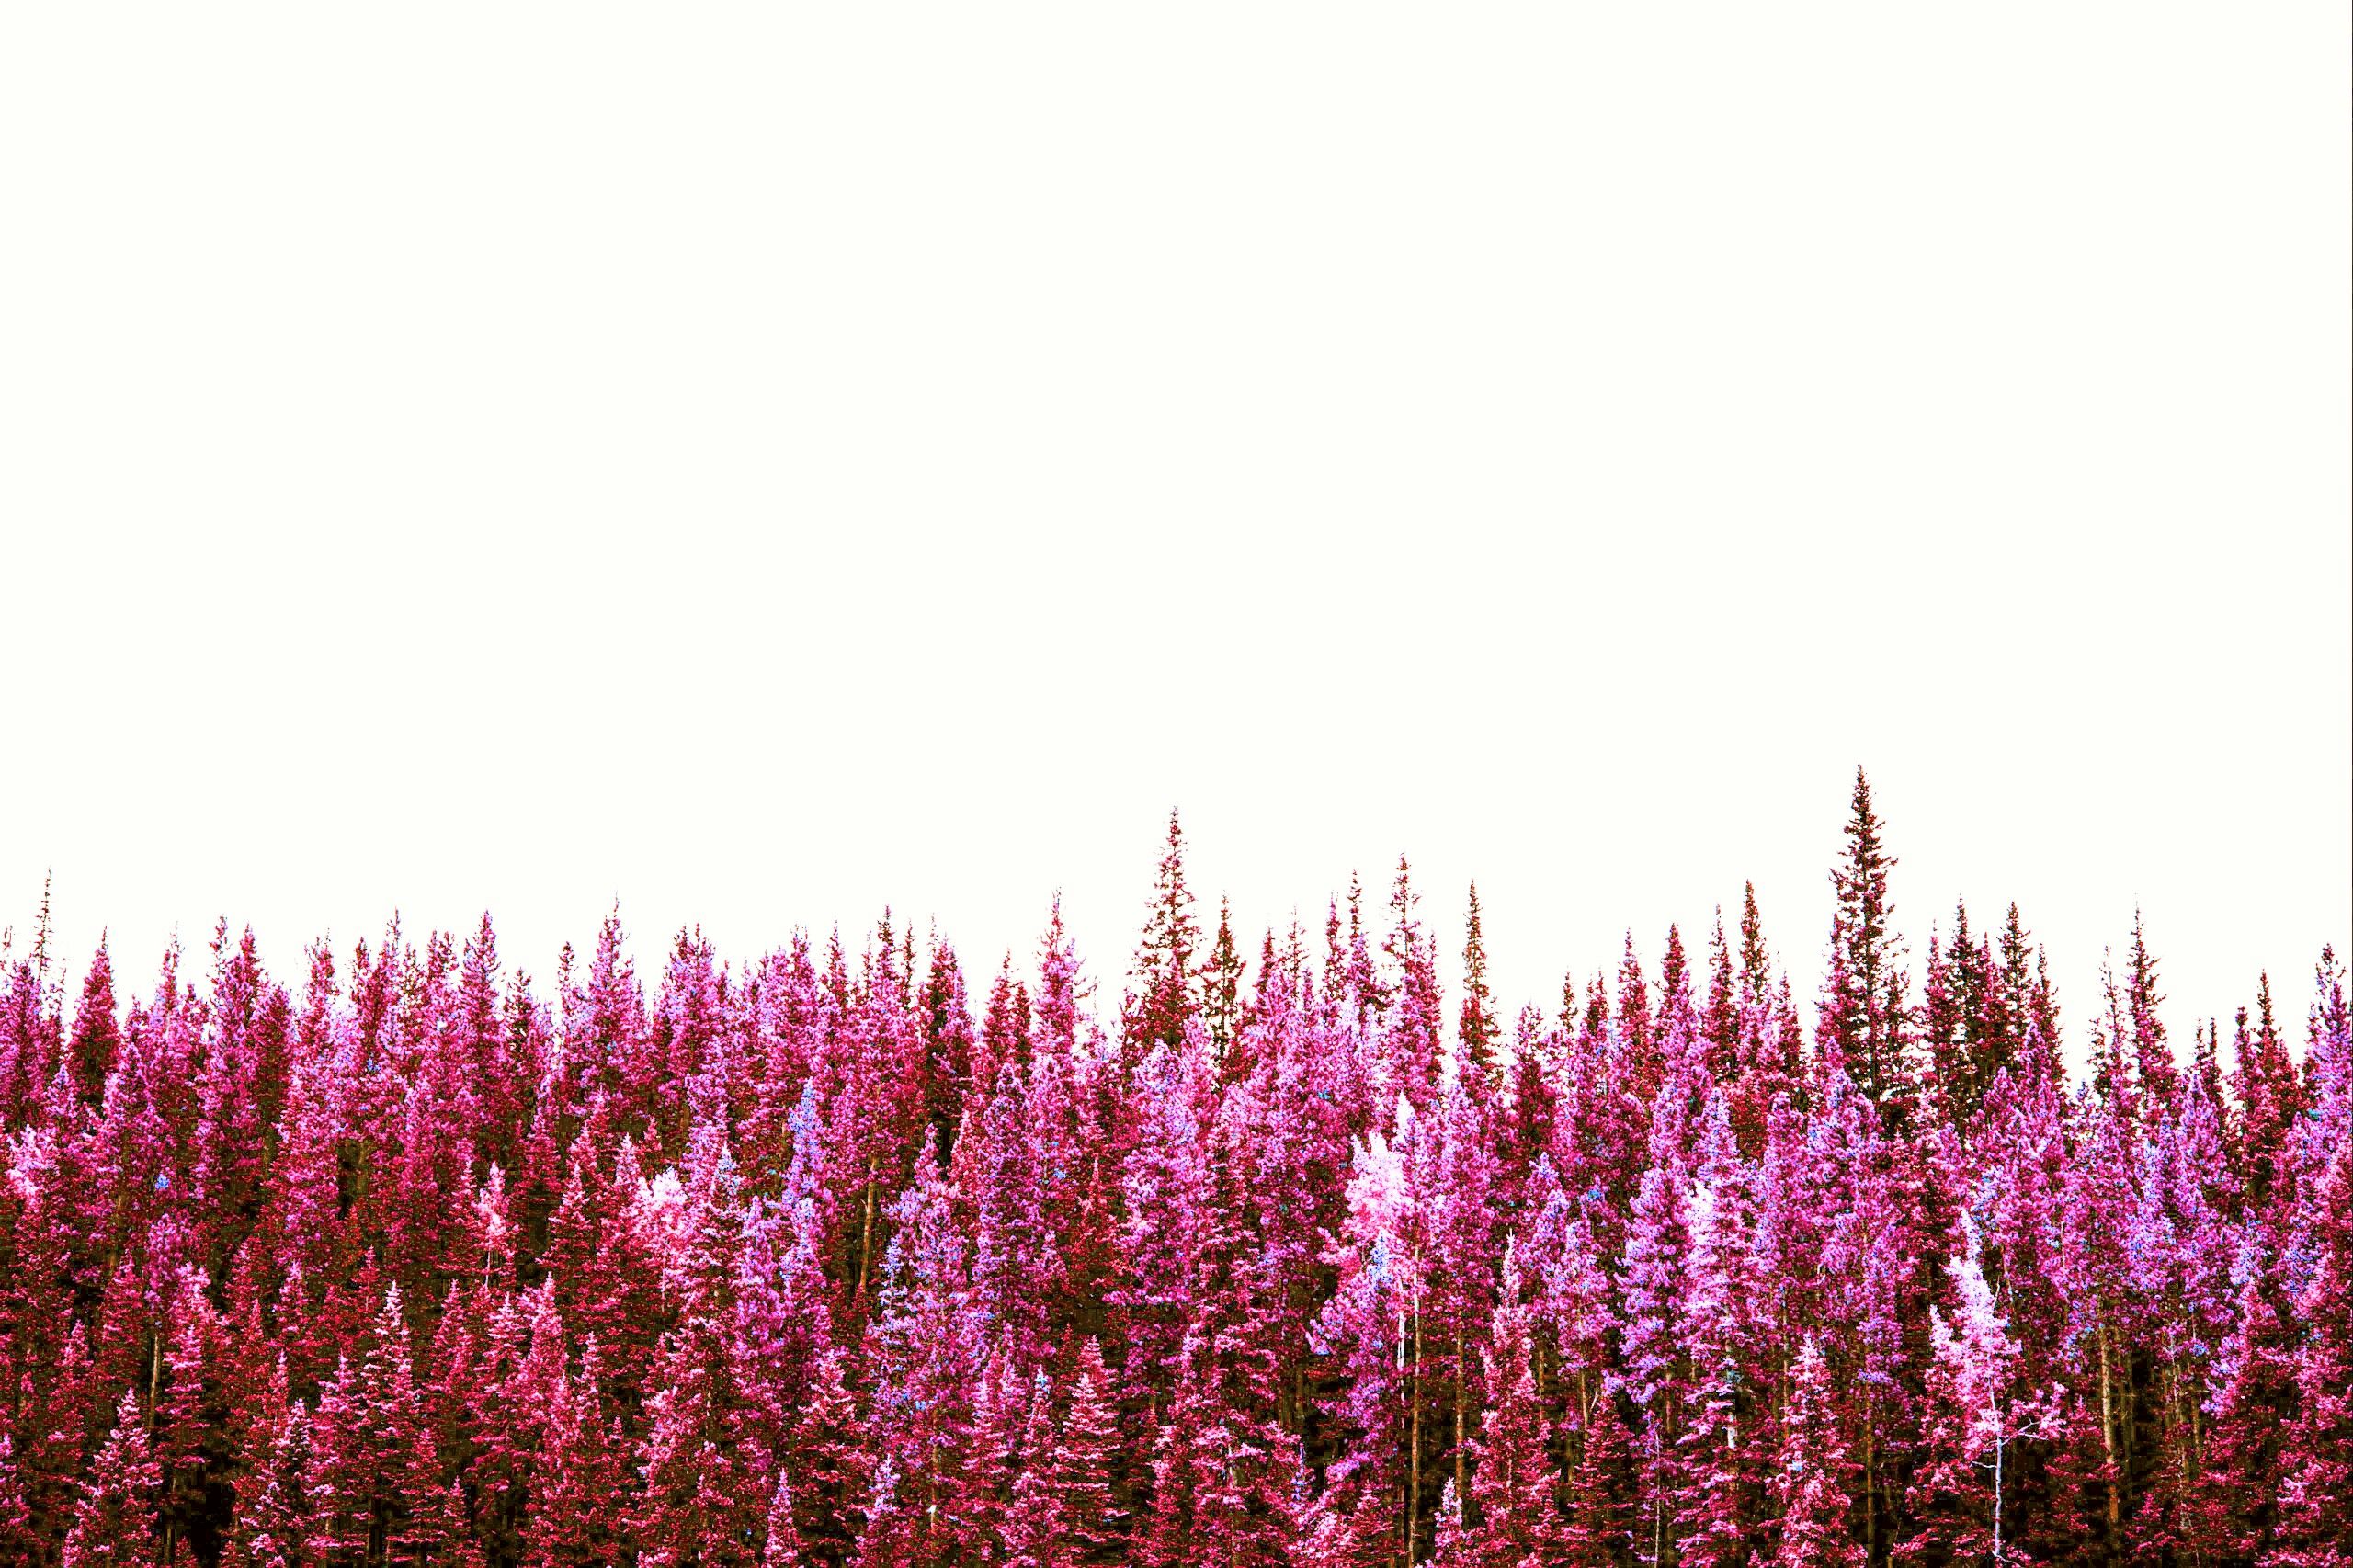 hue pink forest trees aesthetic Image by ▫chloe ▫